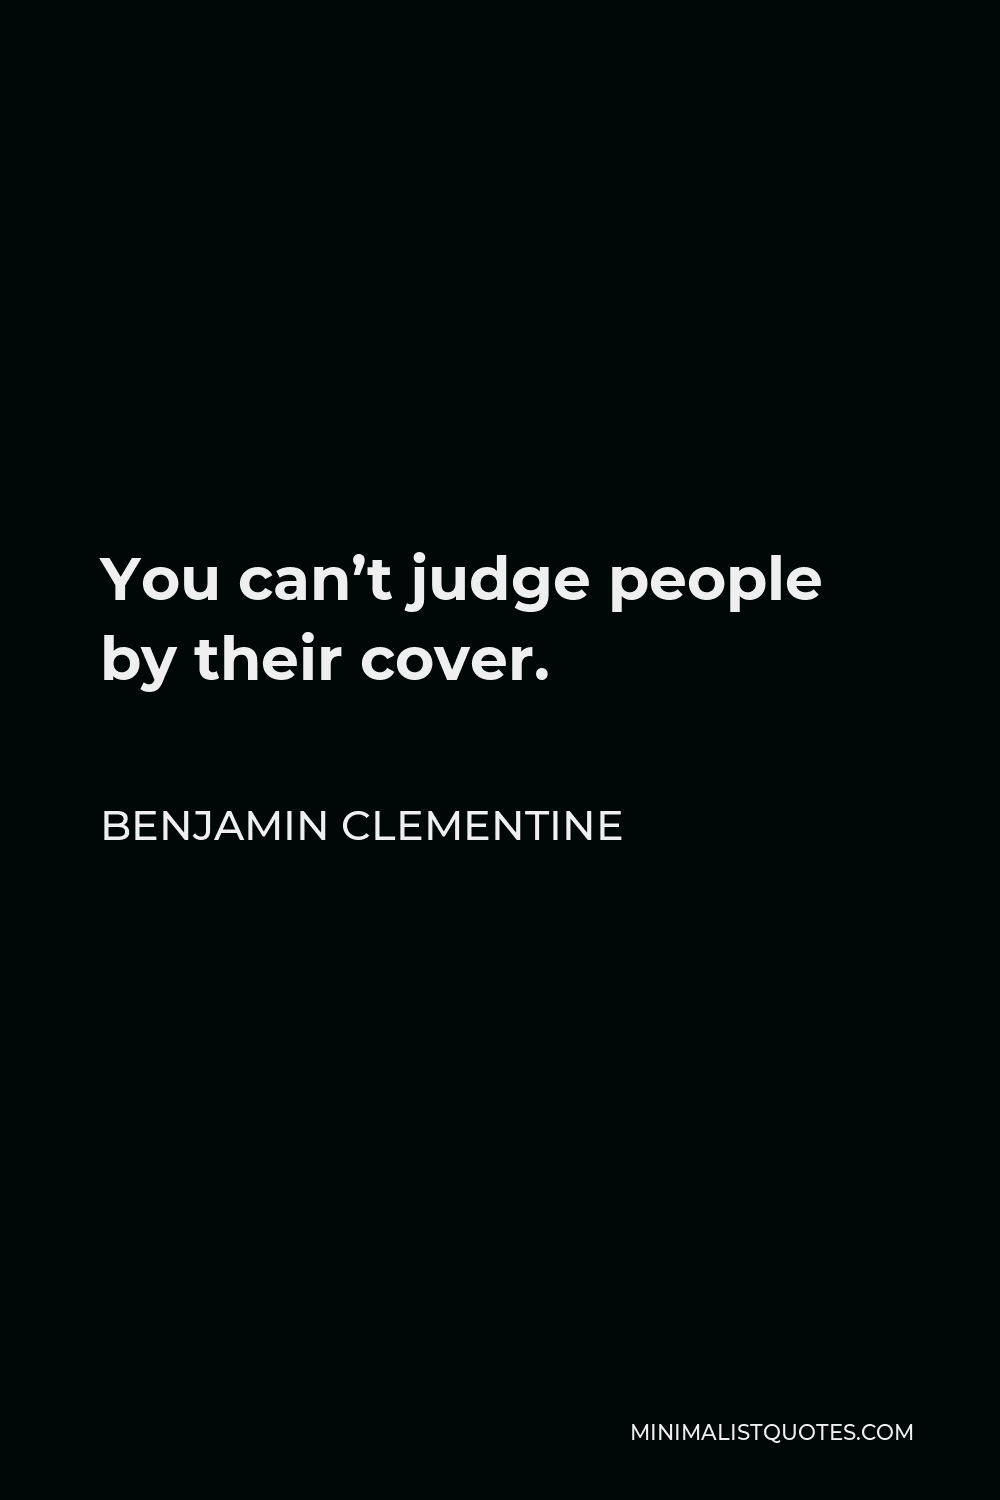 Benjamin Clementine Quote - You can’t judge people by their cover.